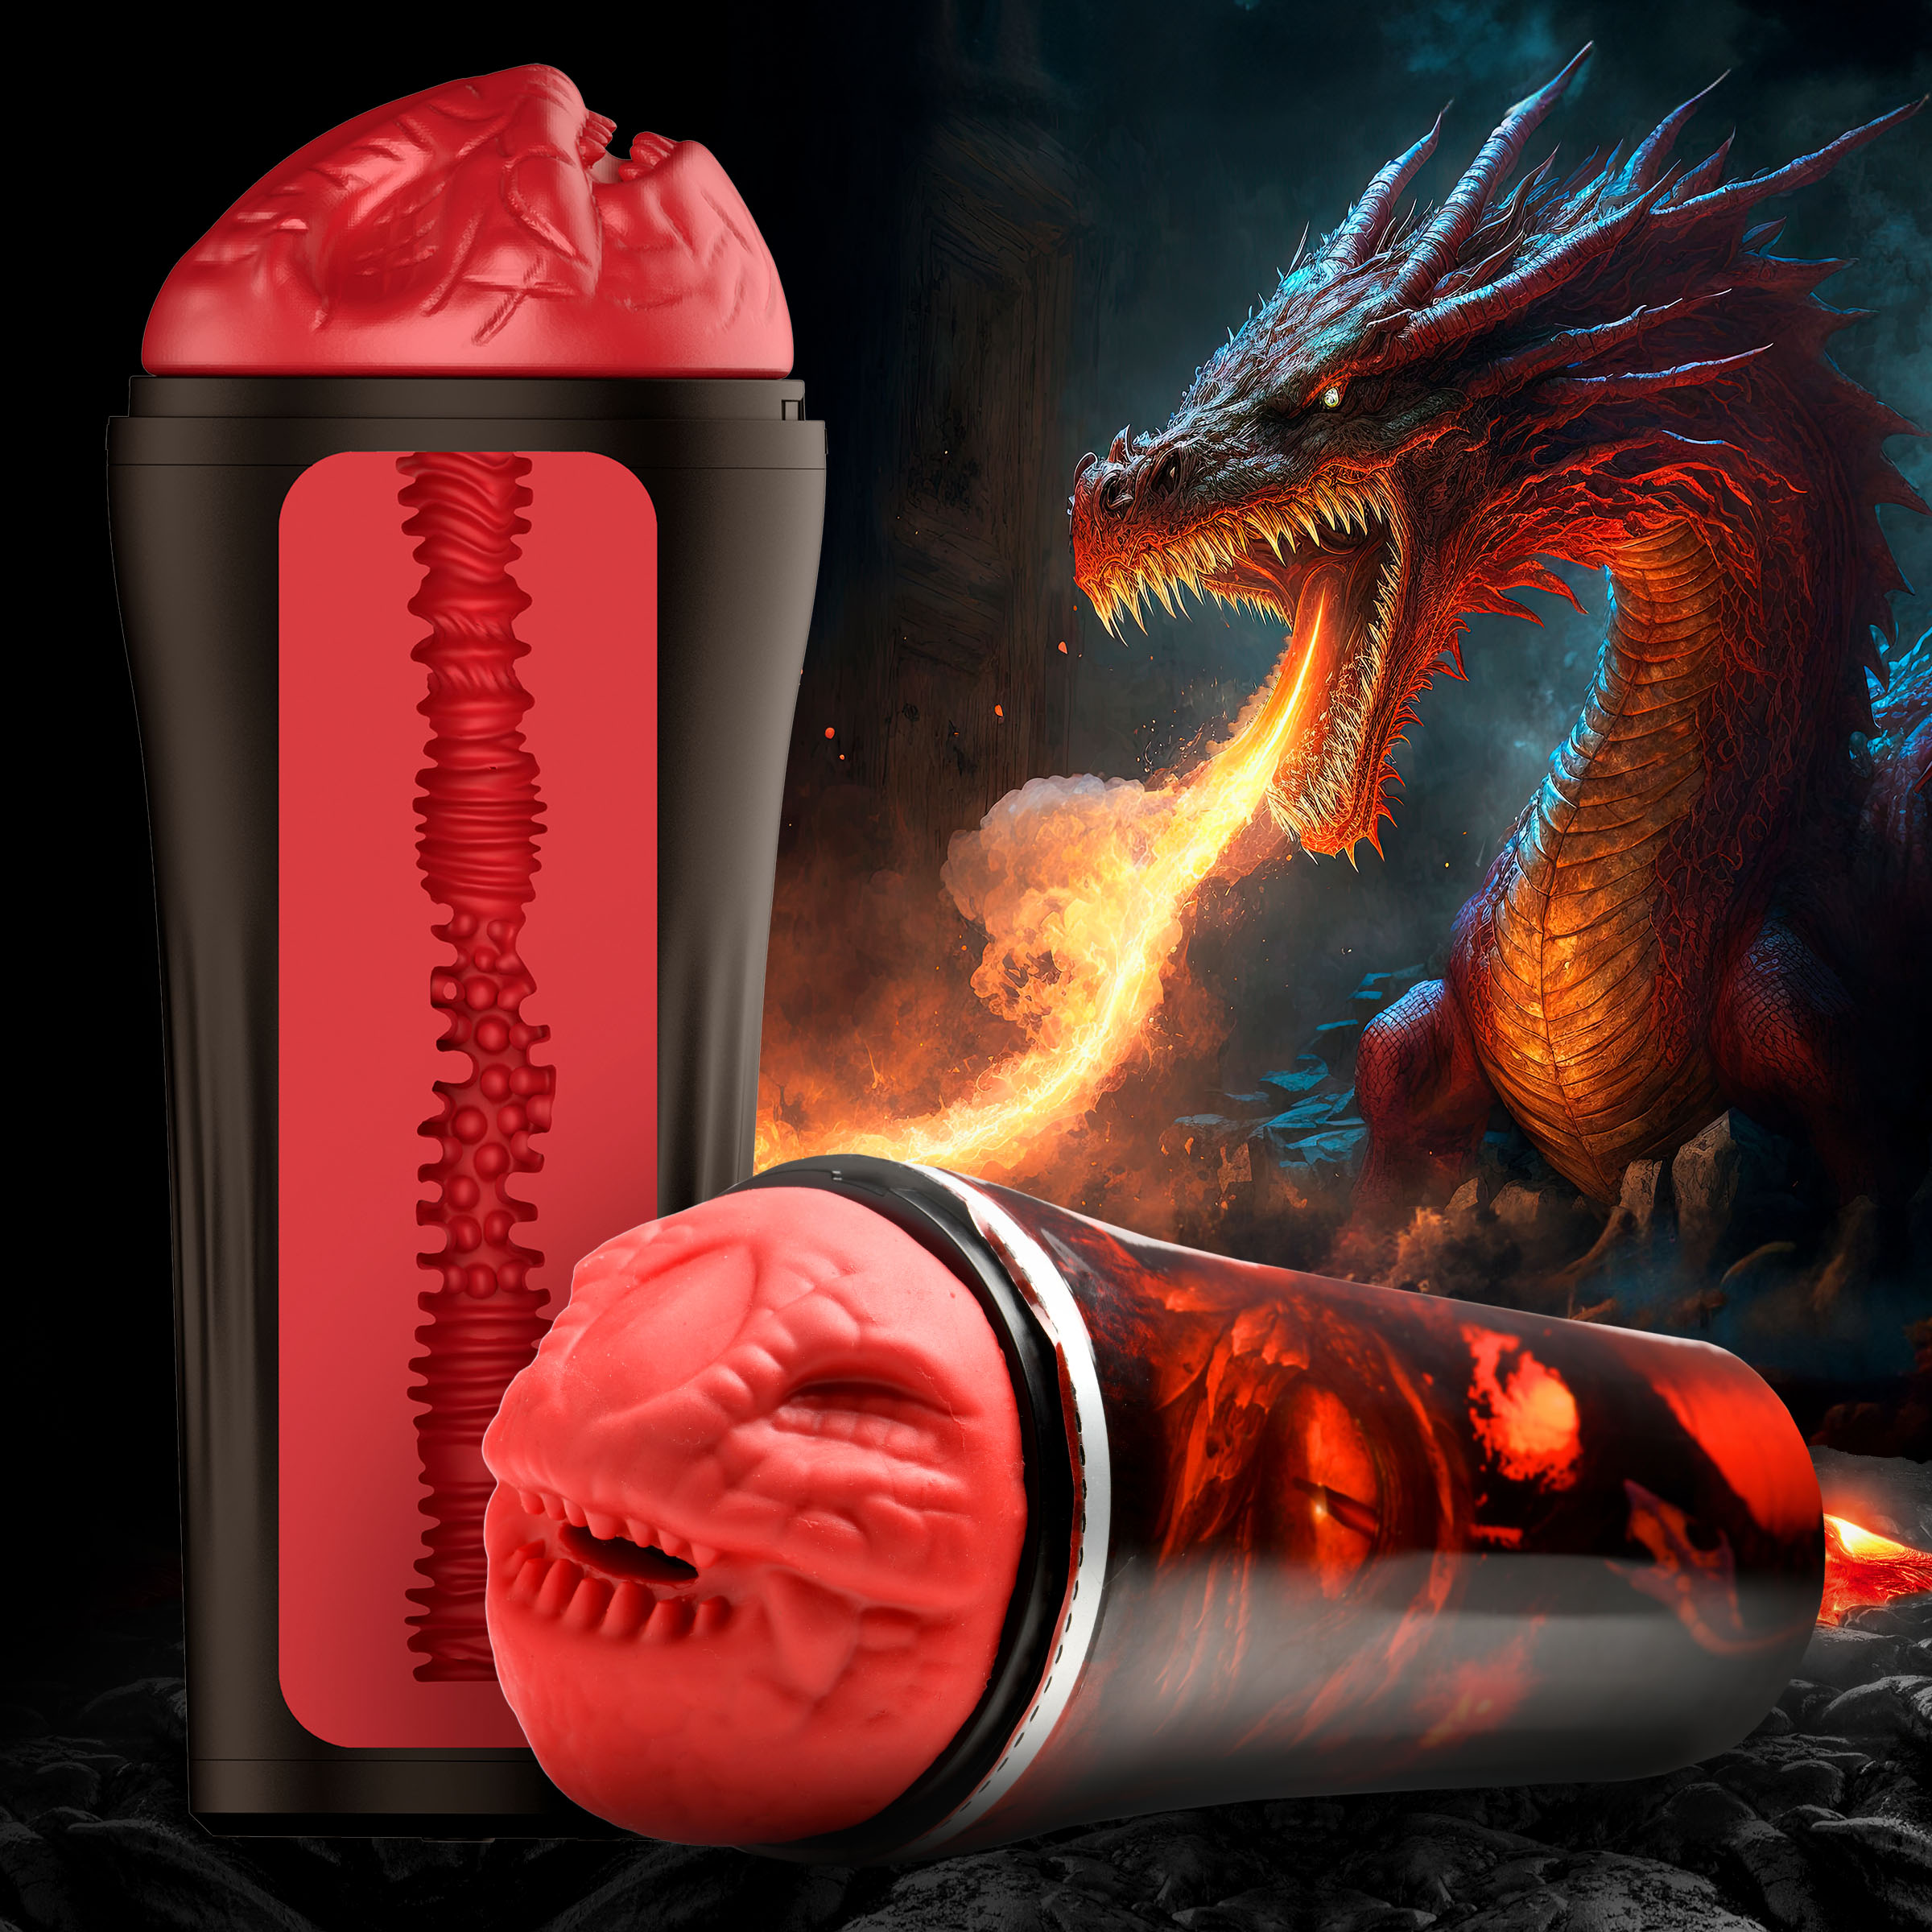 Are you ready to be ravaged by fire-breathing dragons? This scaly